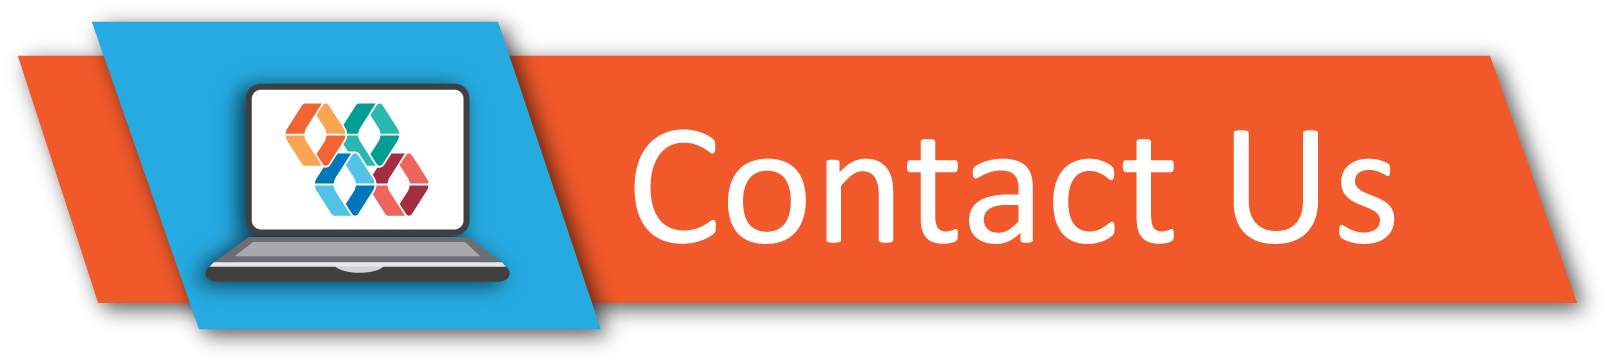 Contact Us Button Website Graphic PNG